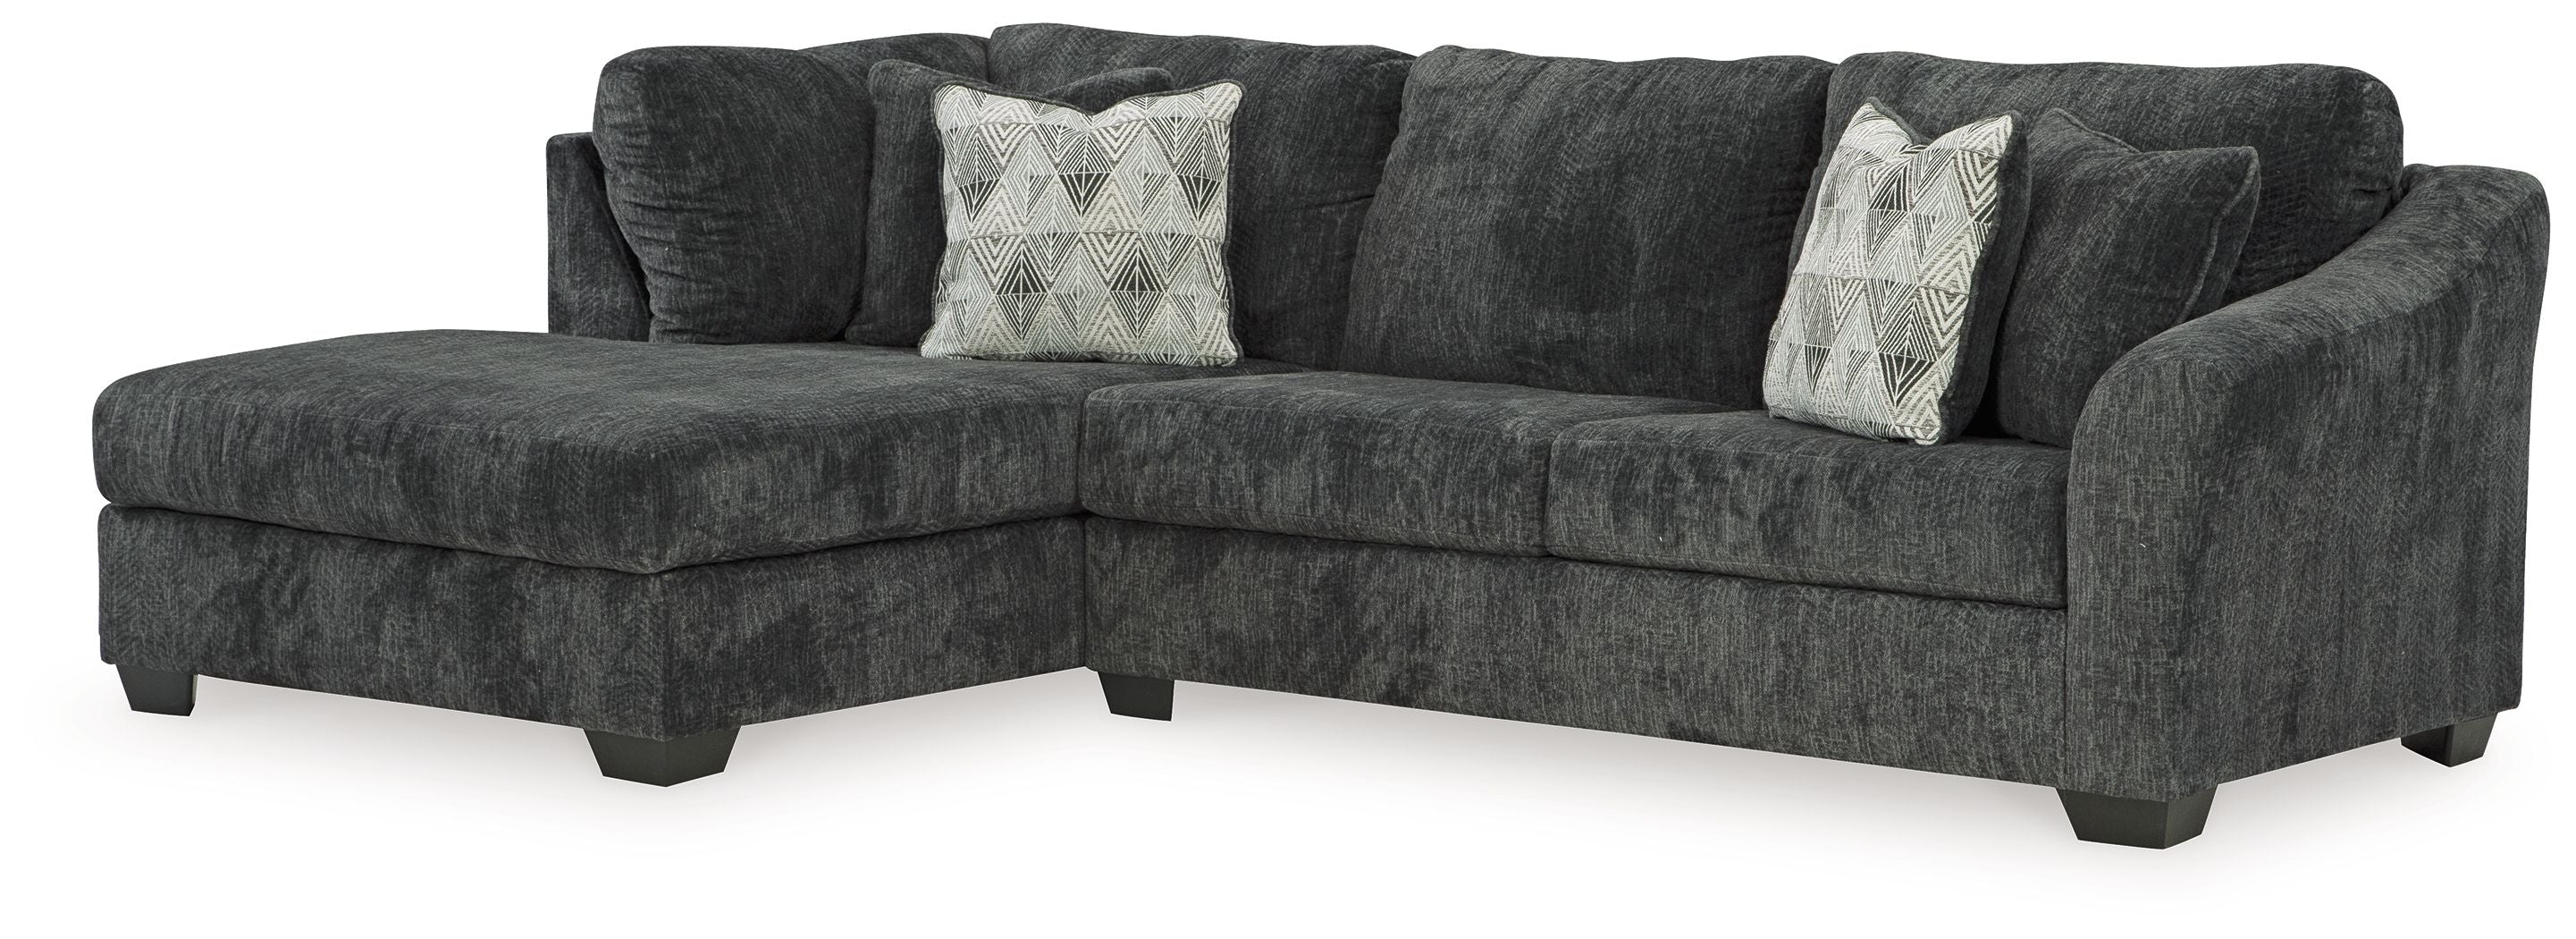 Biddeford 2-Piece Sectional with Chaise (Dark Gray)